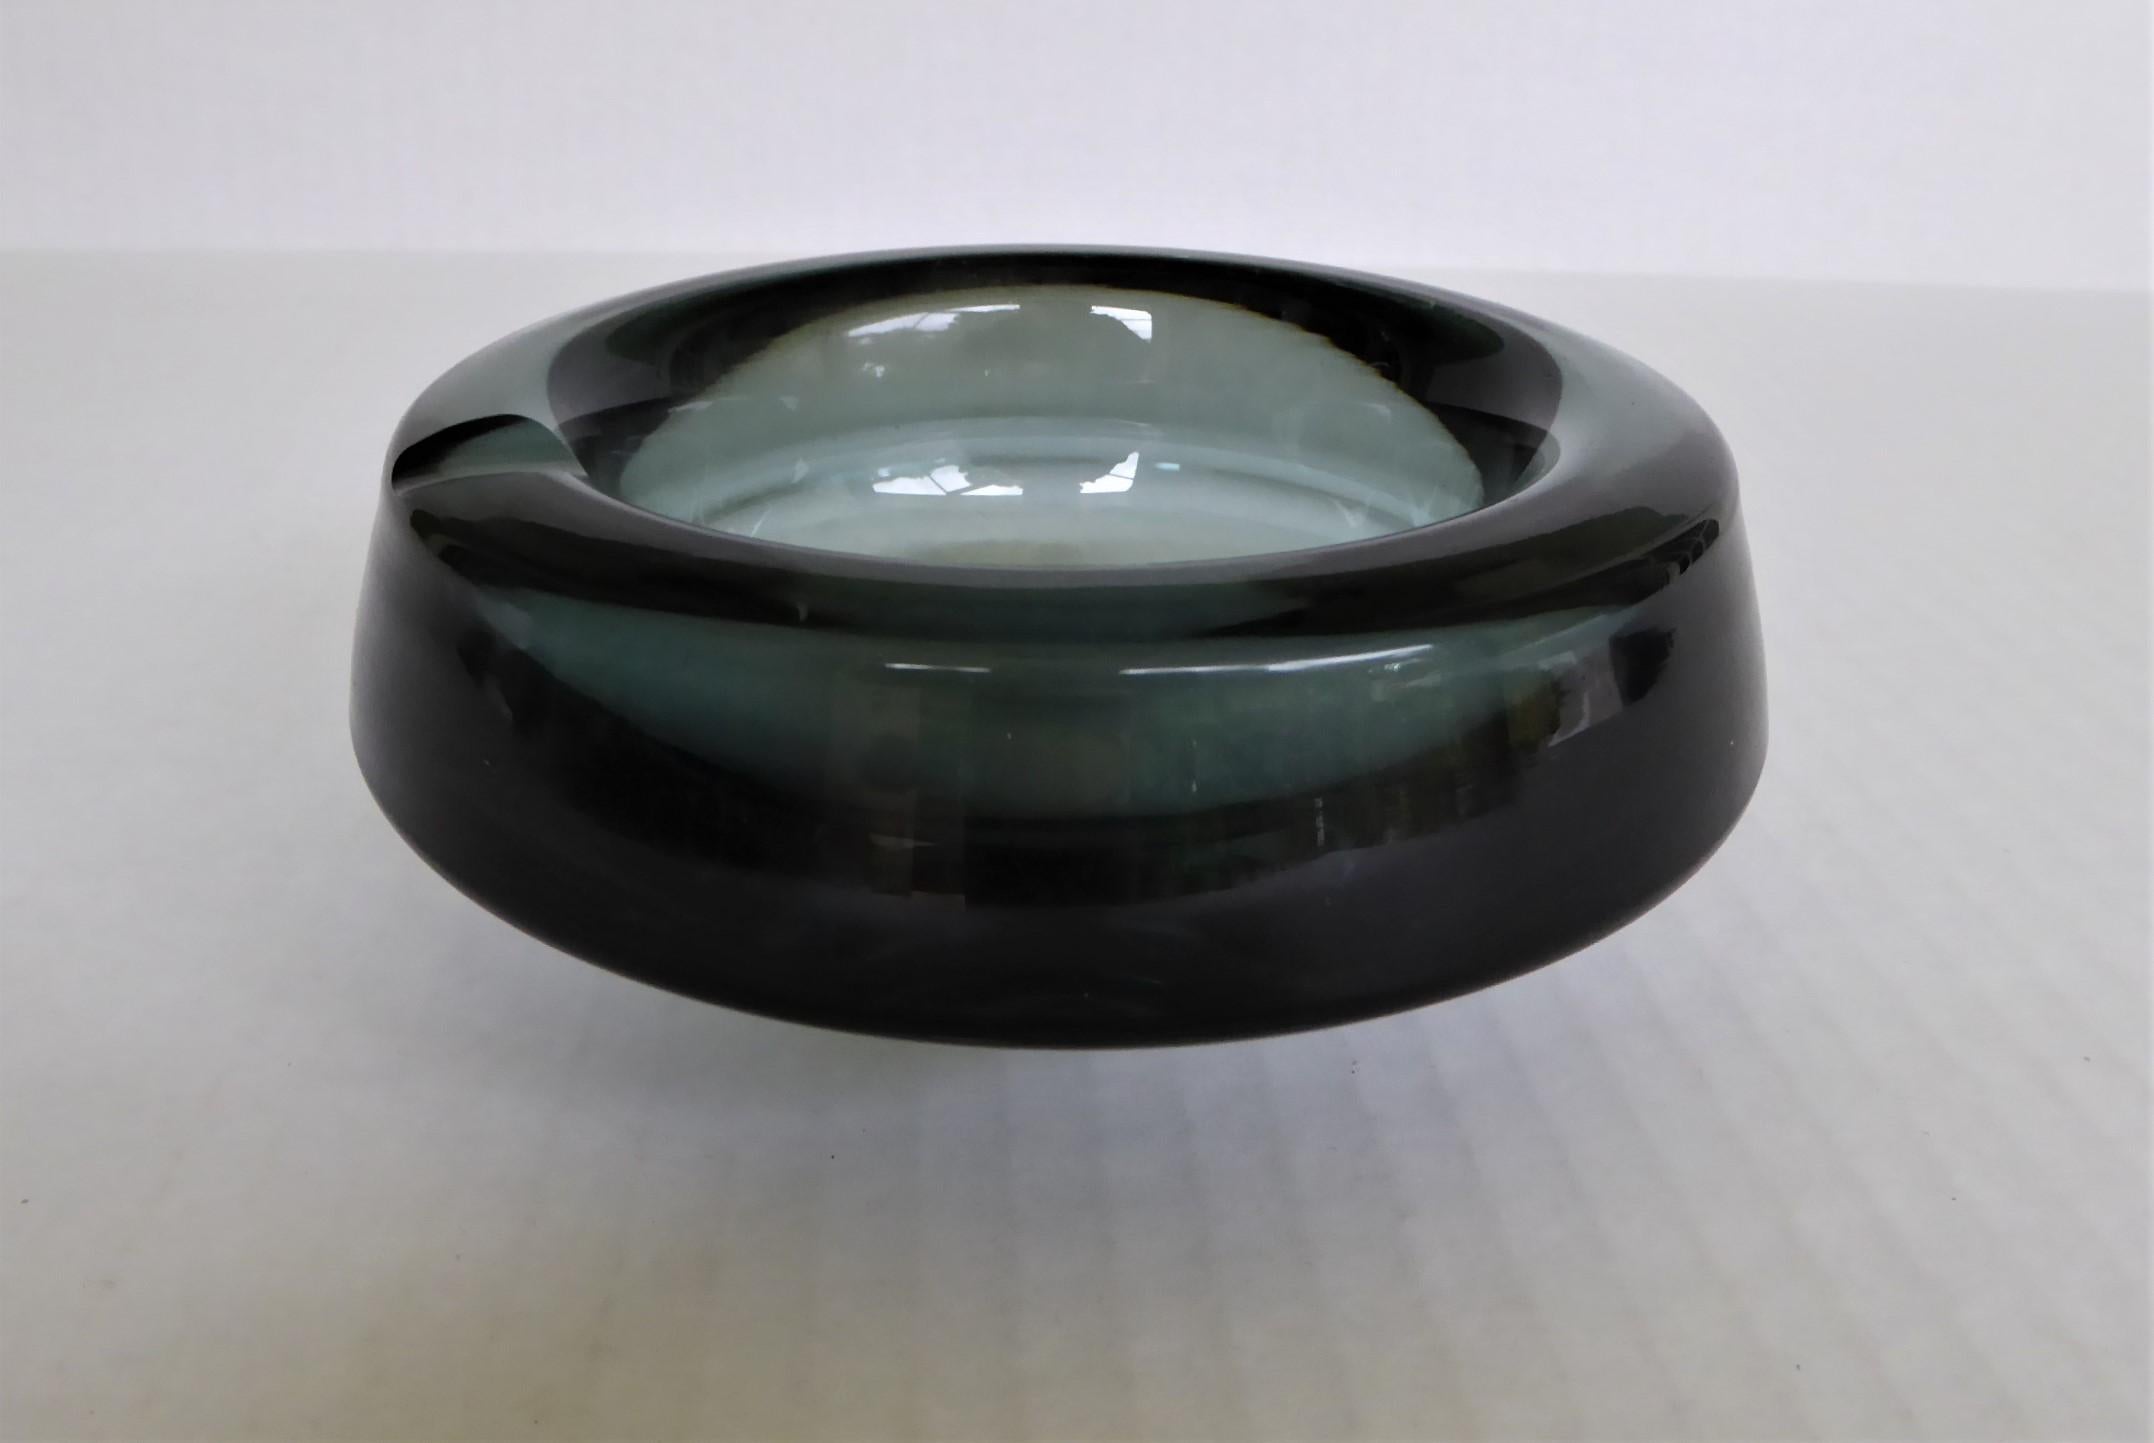 Andries Dirk Copier designed, a signed thick Glass Vessel, Bowl or Ashtray from the 1940s. A 1930s design, Model 2095 and often referred to as the Flying Saucer design. This work is included in the collection of MoMA 1946.
N.V. Koninklijke